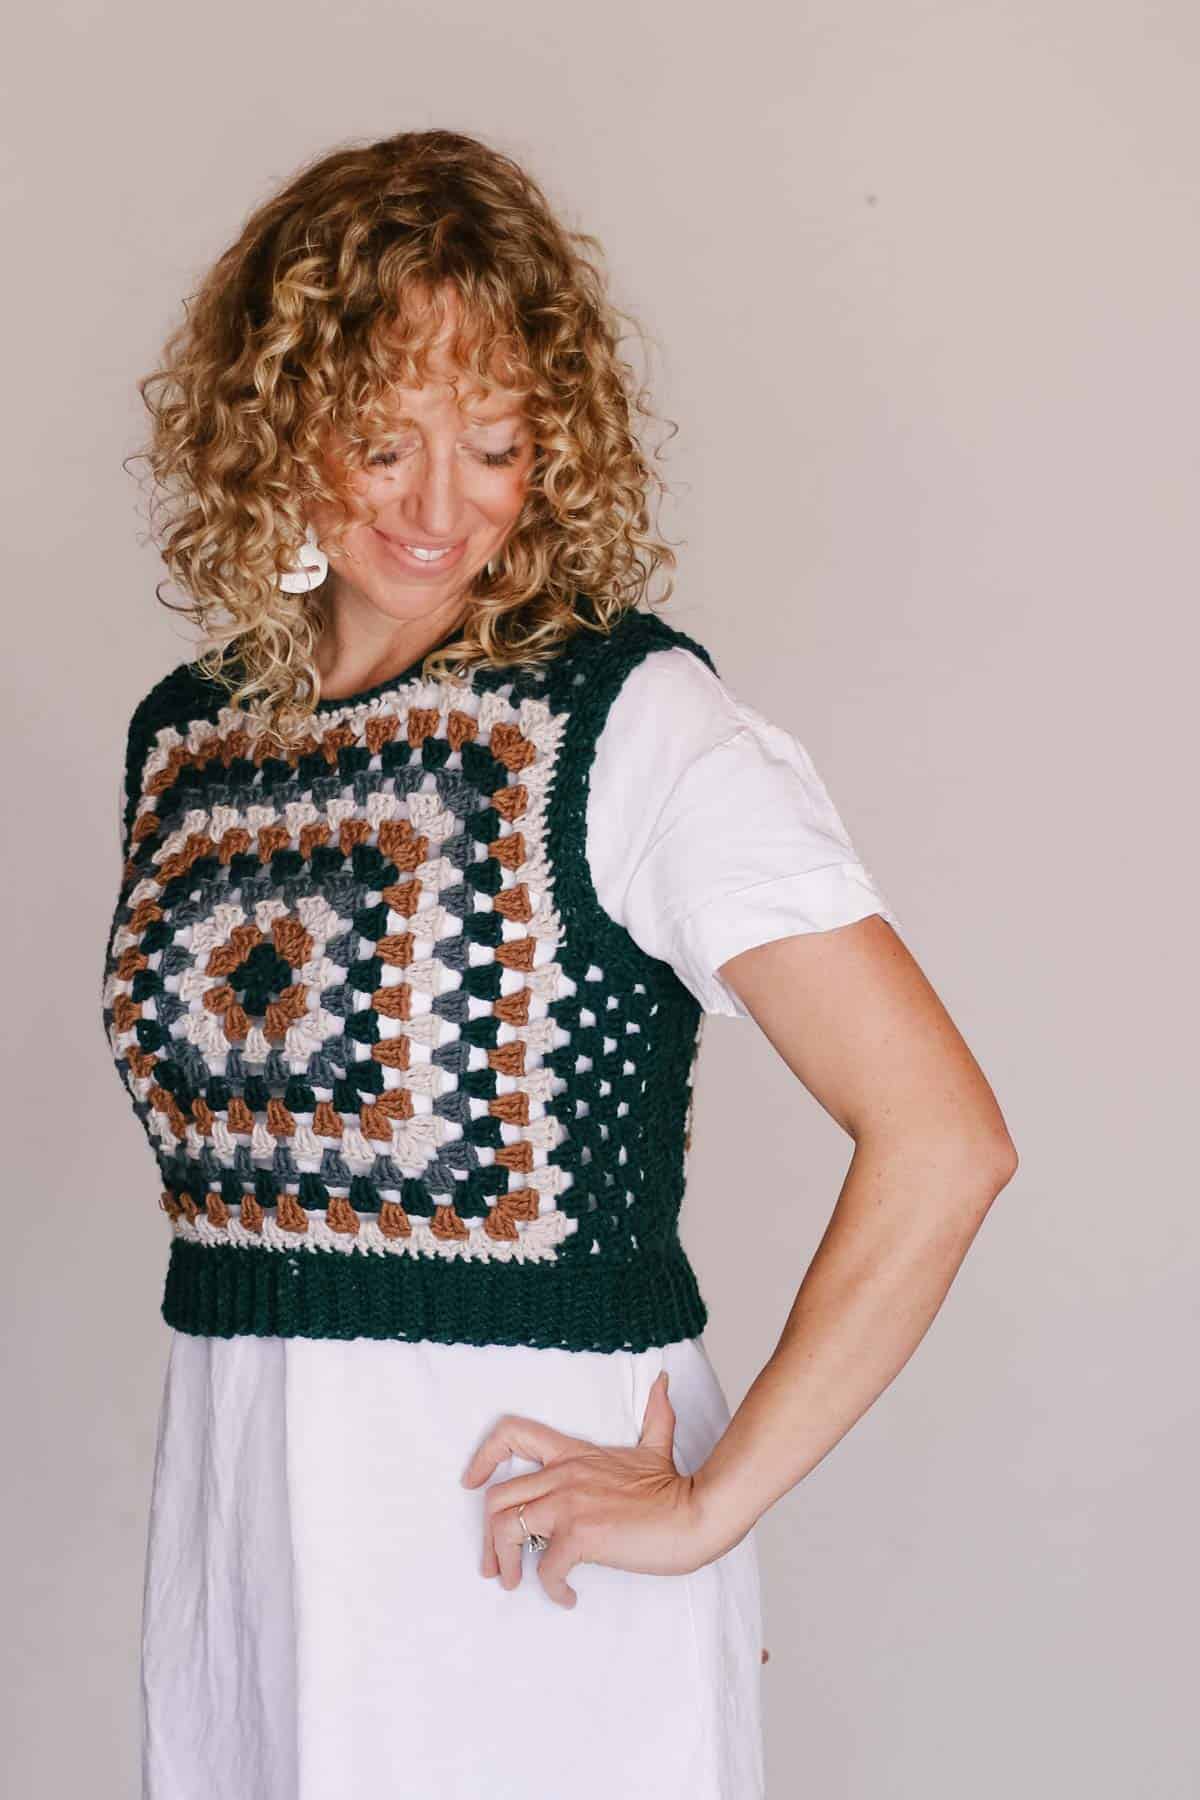 A woman smiling and looking down is wearing a granny square top.